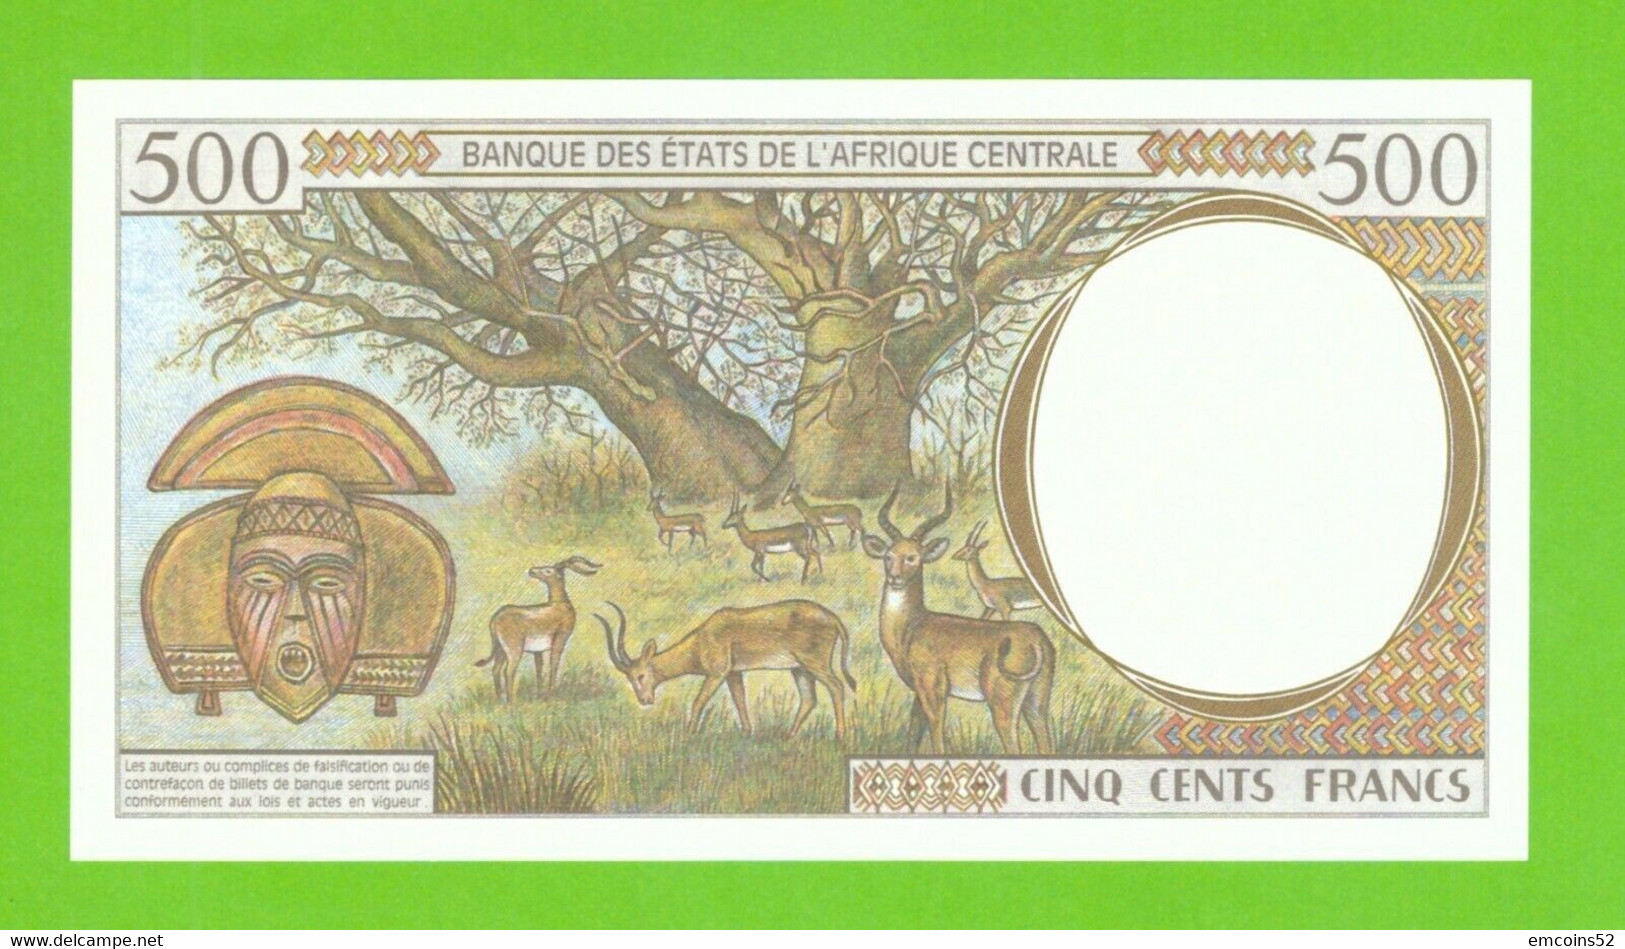 CAMEROUN C.A.S. 500 FRANCS 1993  P-201Ea   UNC - Central African States